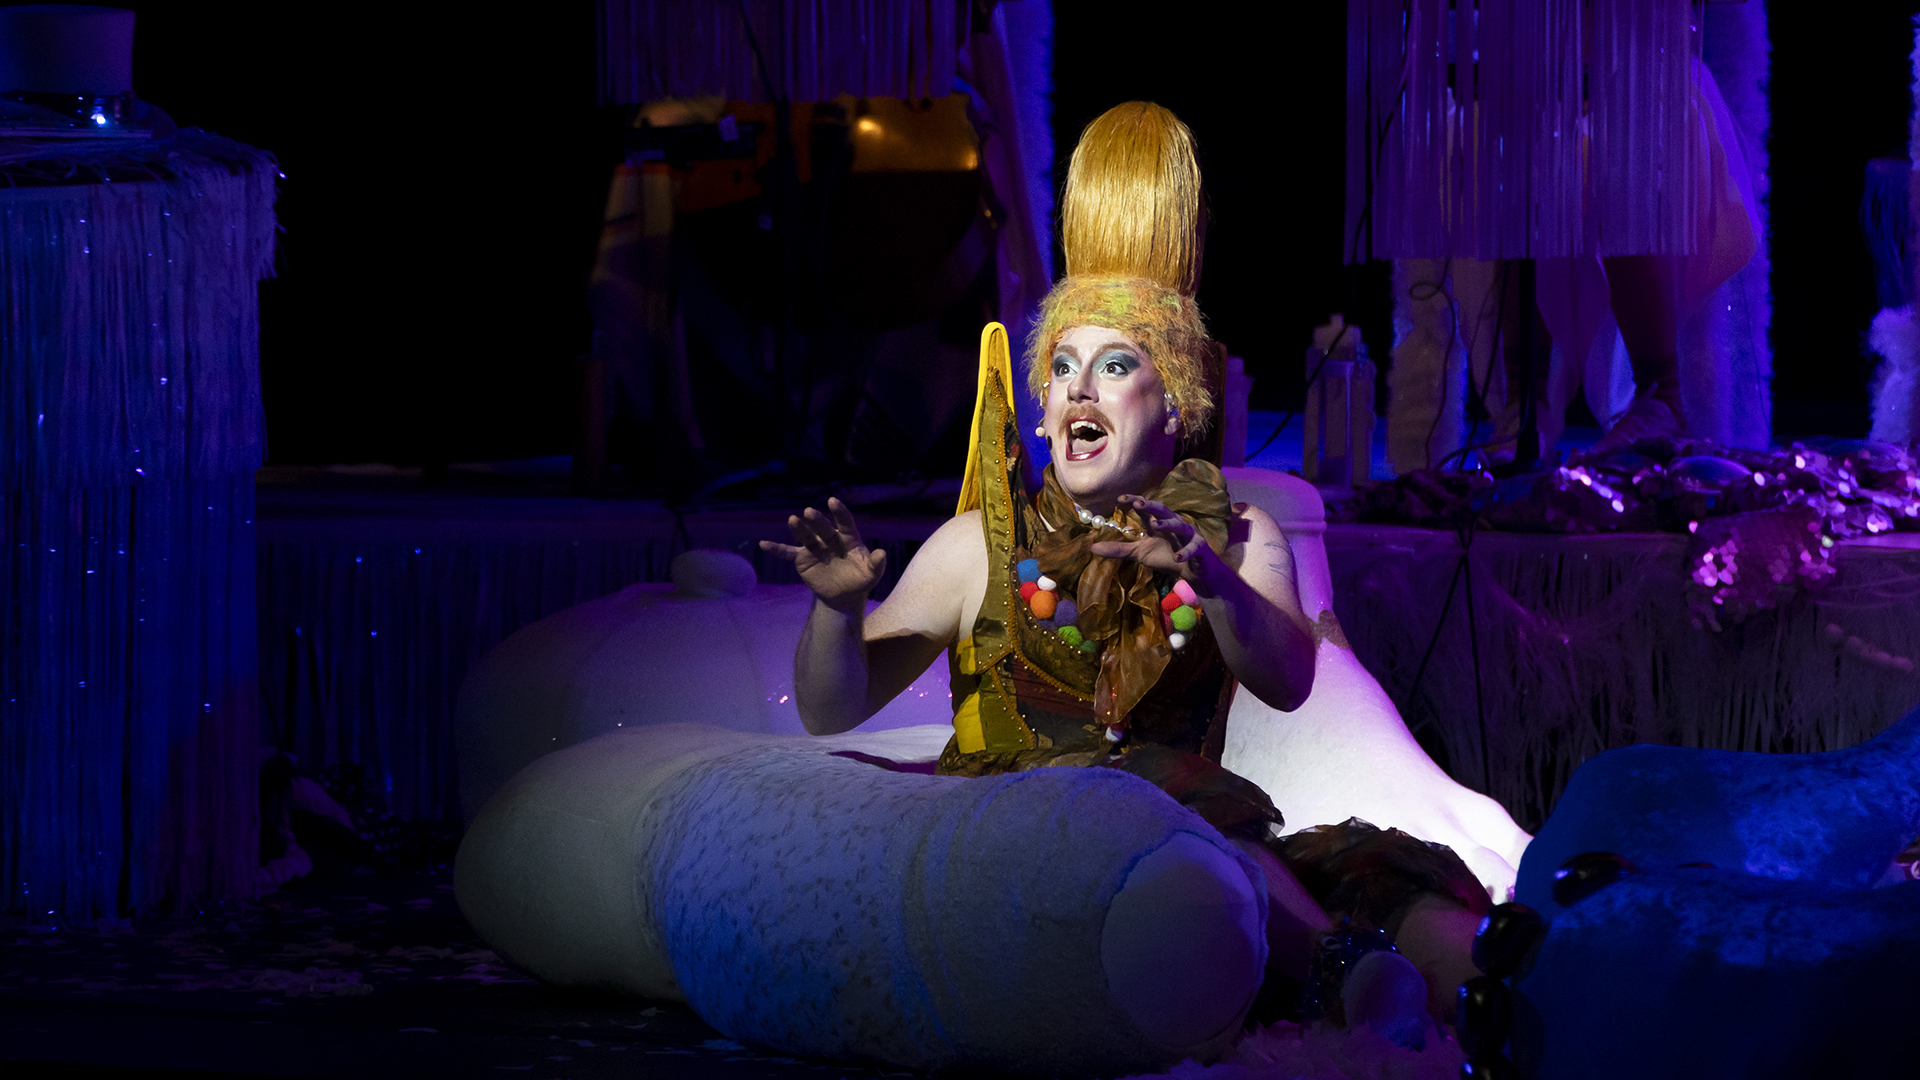 A man wearing a tall golden yellow wig in a kind of bun performs a solo in a spotlight on stage